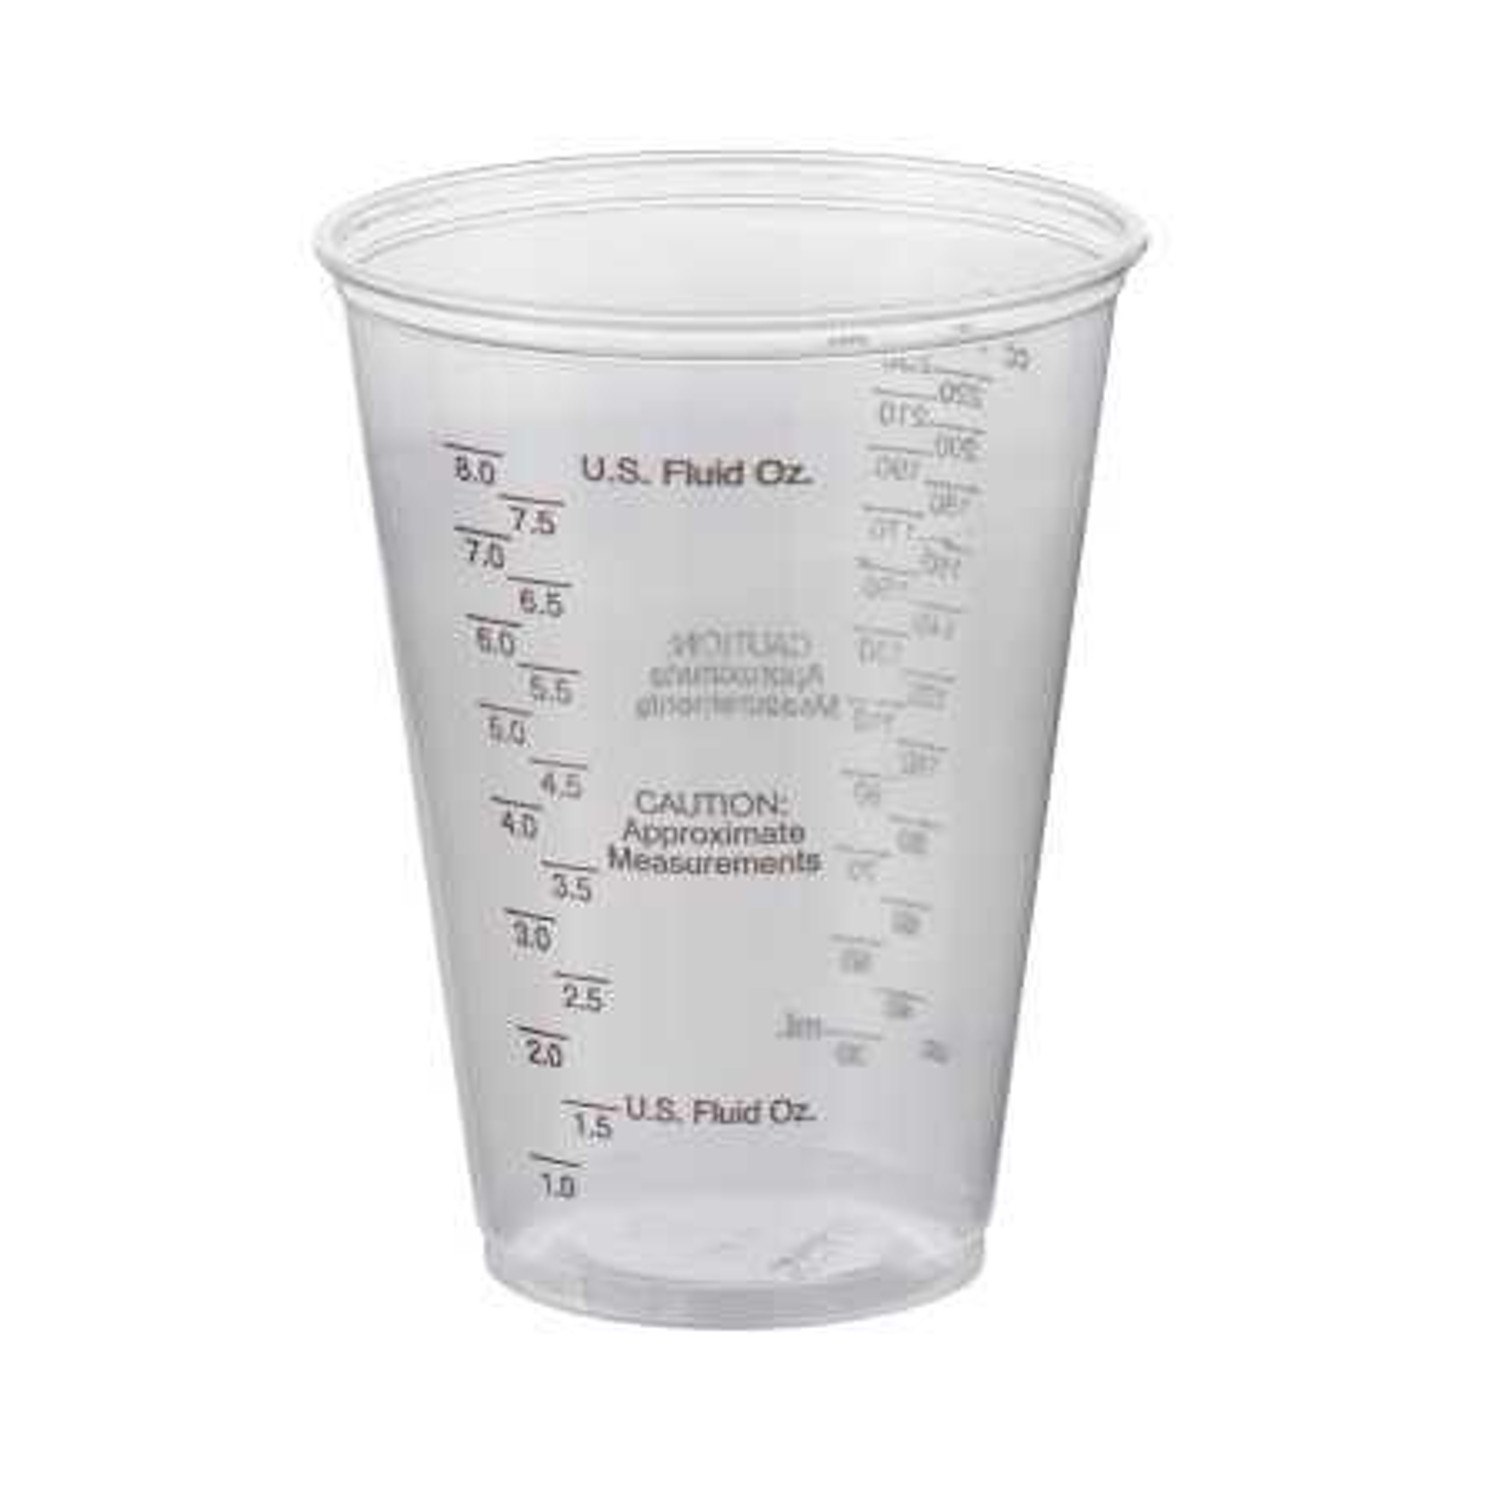 https://cdn11.bigcommerce.com/s-1l9d1d1d79/images/stencil/1500x1500/products/133546/275556/Drinking-Cup-Solo-Ultra-Clear-10-oz-Clear-Polyethylene-Disposable-TP10DGM-SL50-TP10DGM-SOLOSWEETHEART-CUP-COMPANY-873751SL_212282__66496.1682533263.jpg?c=2&imbypass=on